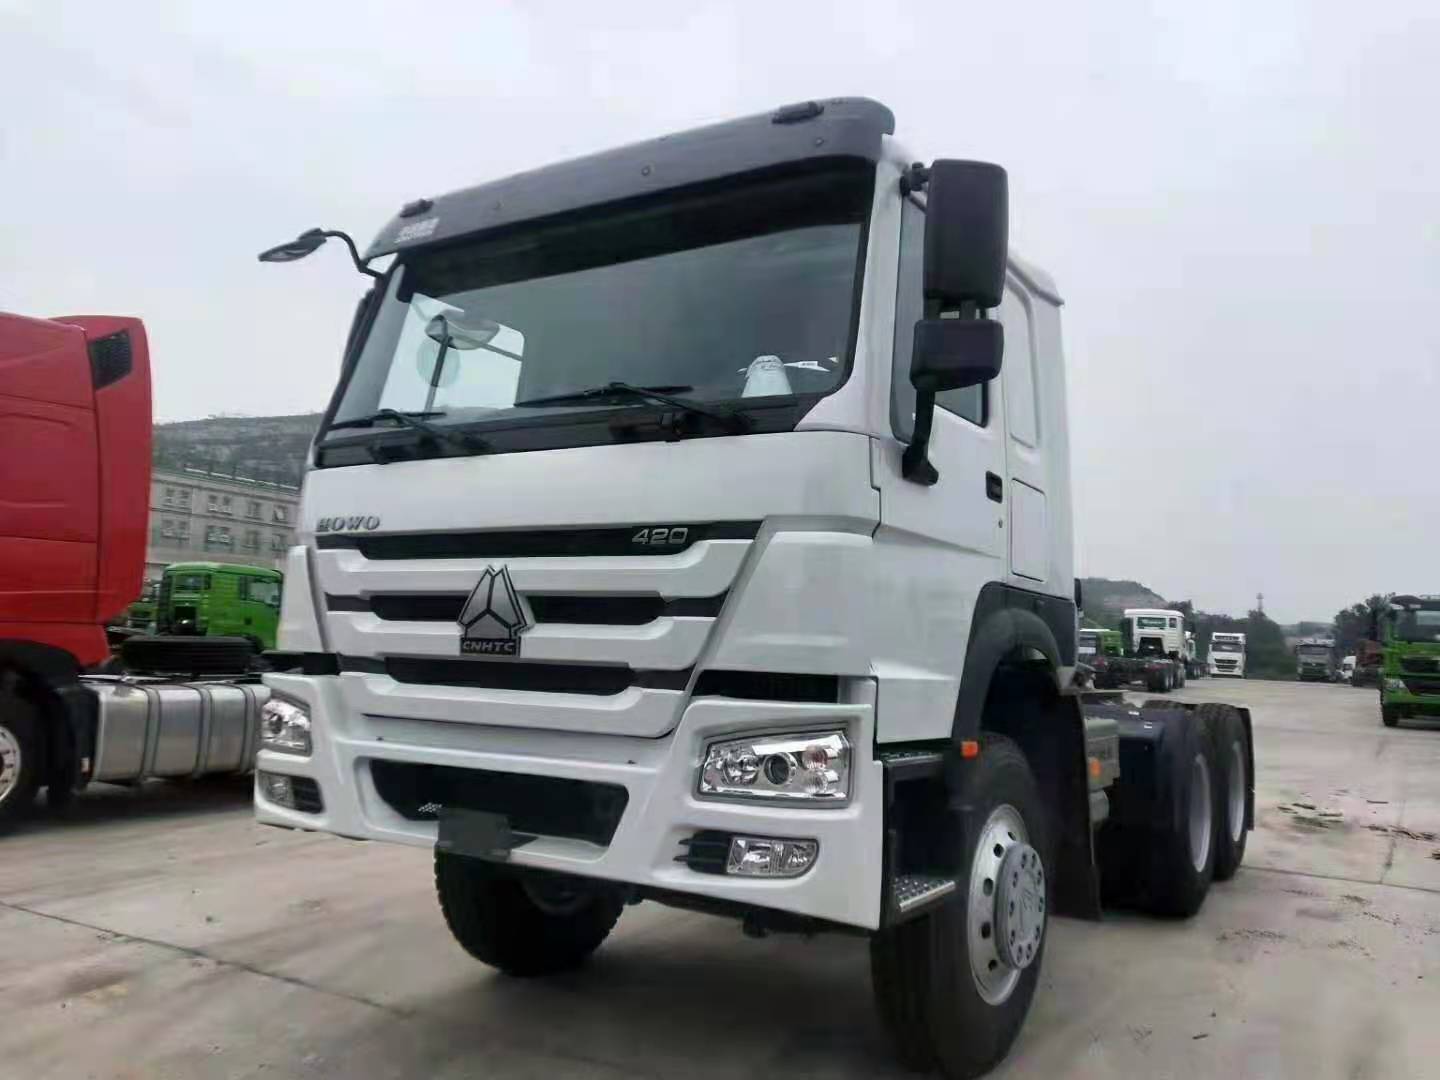 reliable supplier used sinotruk howo trucks tractor trailer truck heavy Manufacturers, reliable supplier used sinotruk howo trucks tractor trailer truck heavy Factory, Supply reliable supplier used sinotruk howo trucks tractor trailer truck heavy